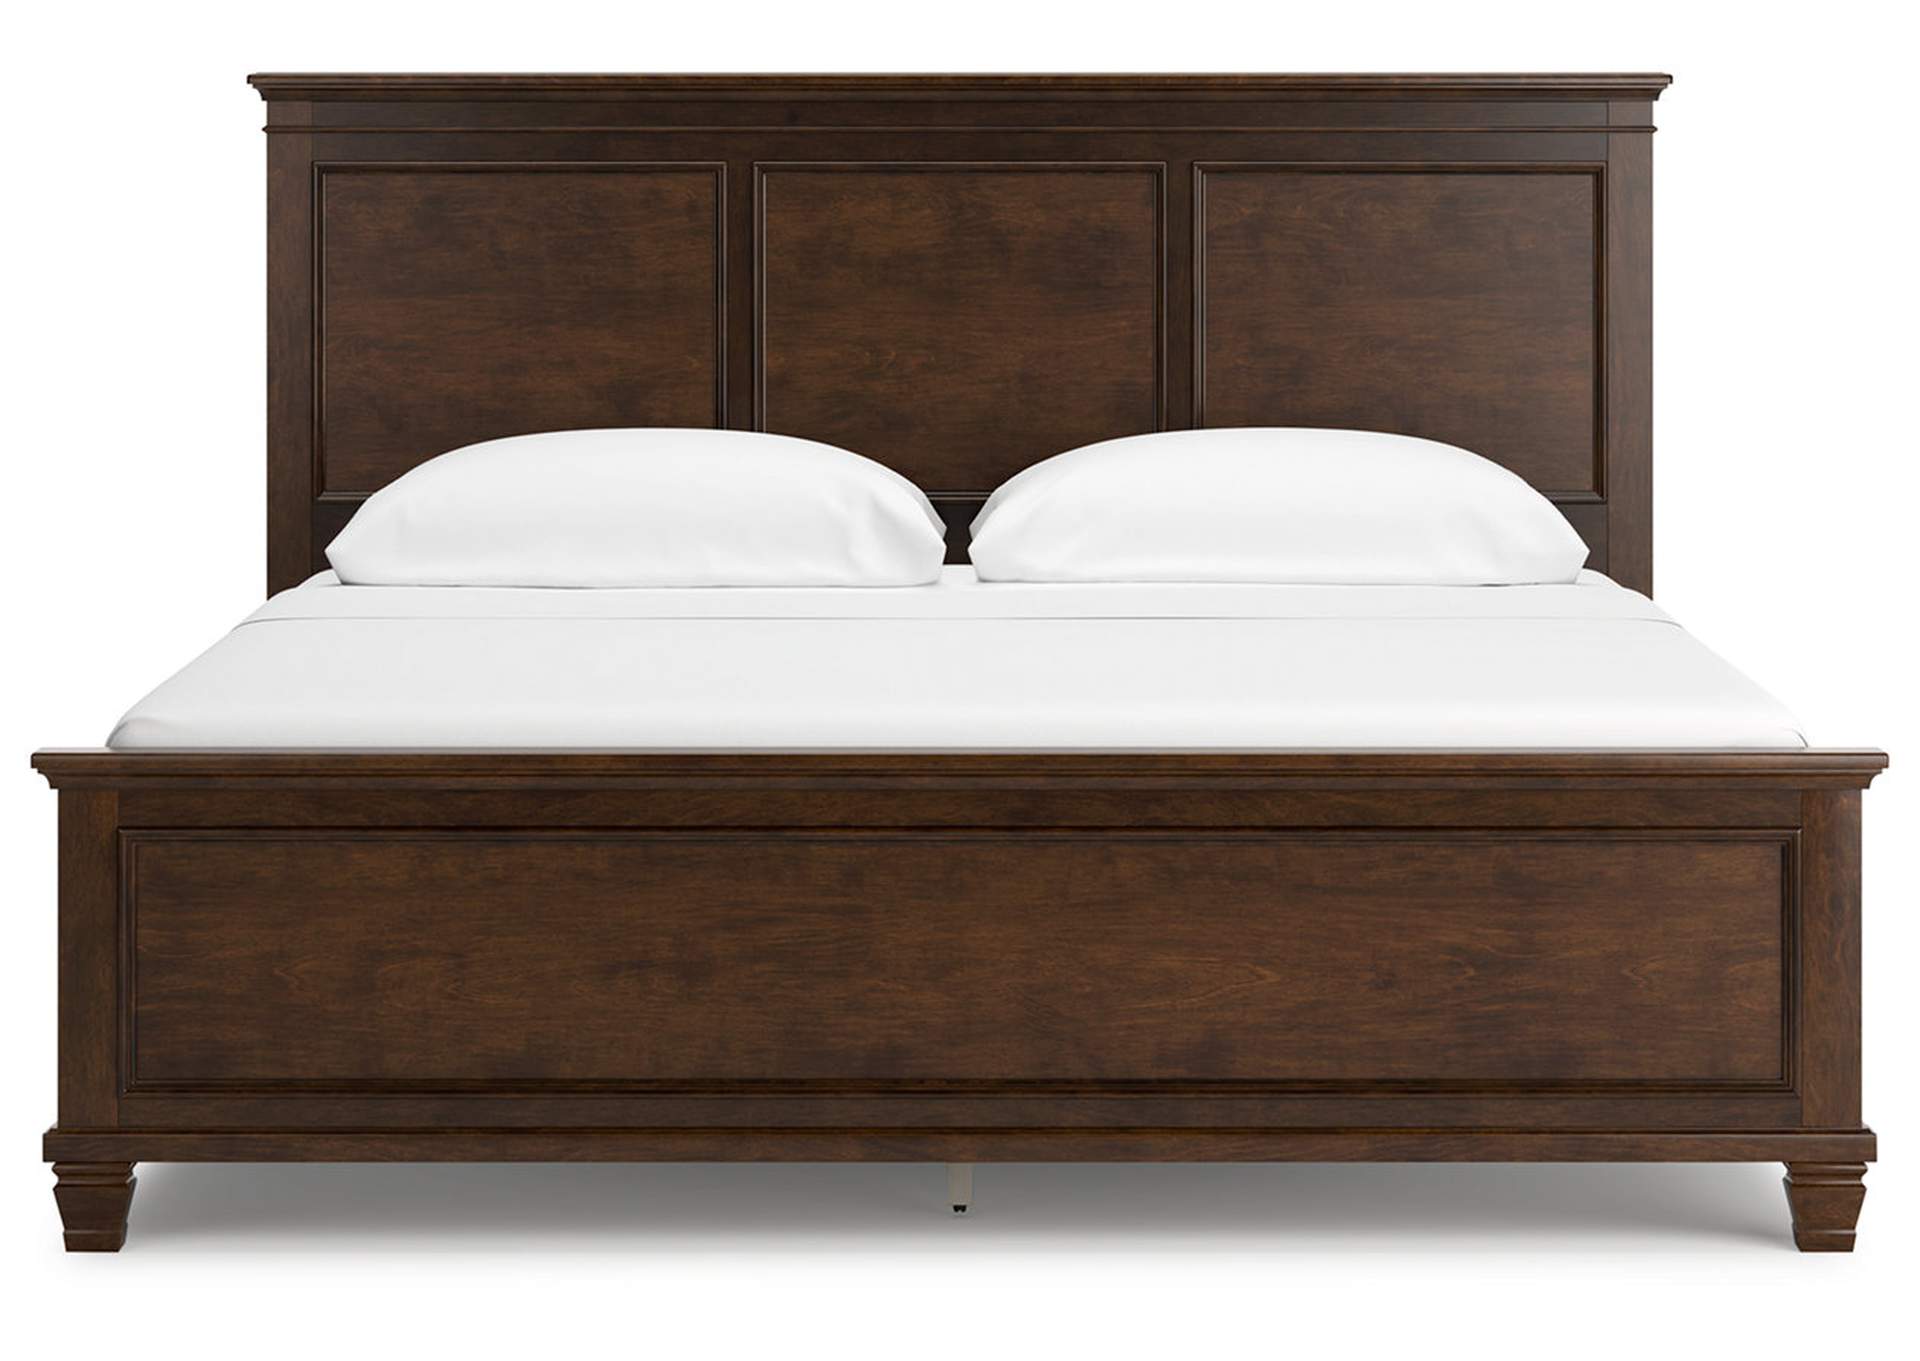 Danabrin California King Panel Bed,Signature Design By Ashley